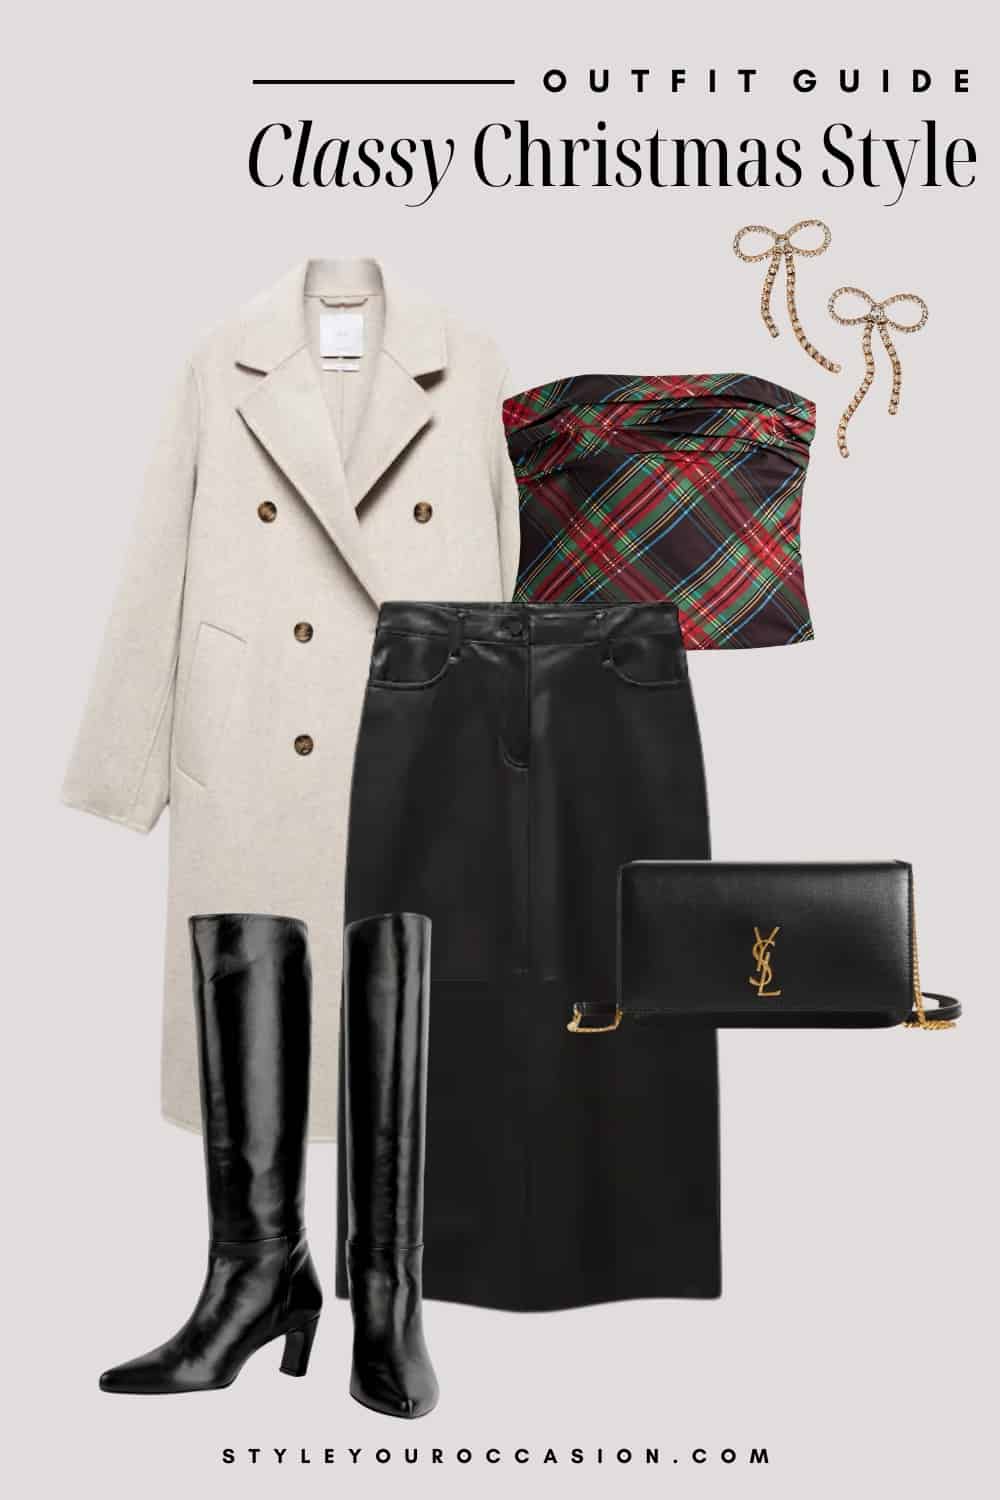 An image board of a Christmas outfit featuring a black leather midi skirt, a green and red plaid tube top, a long white coat, knee-high black leather boots, gold bow earrings, and a black leather crossbody bag